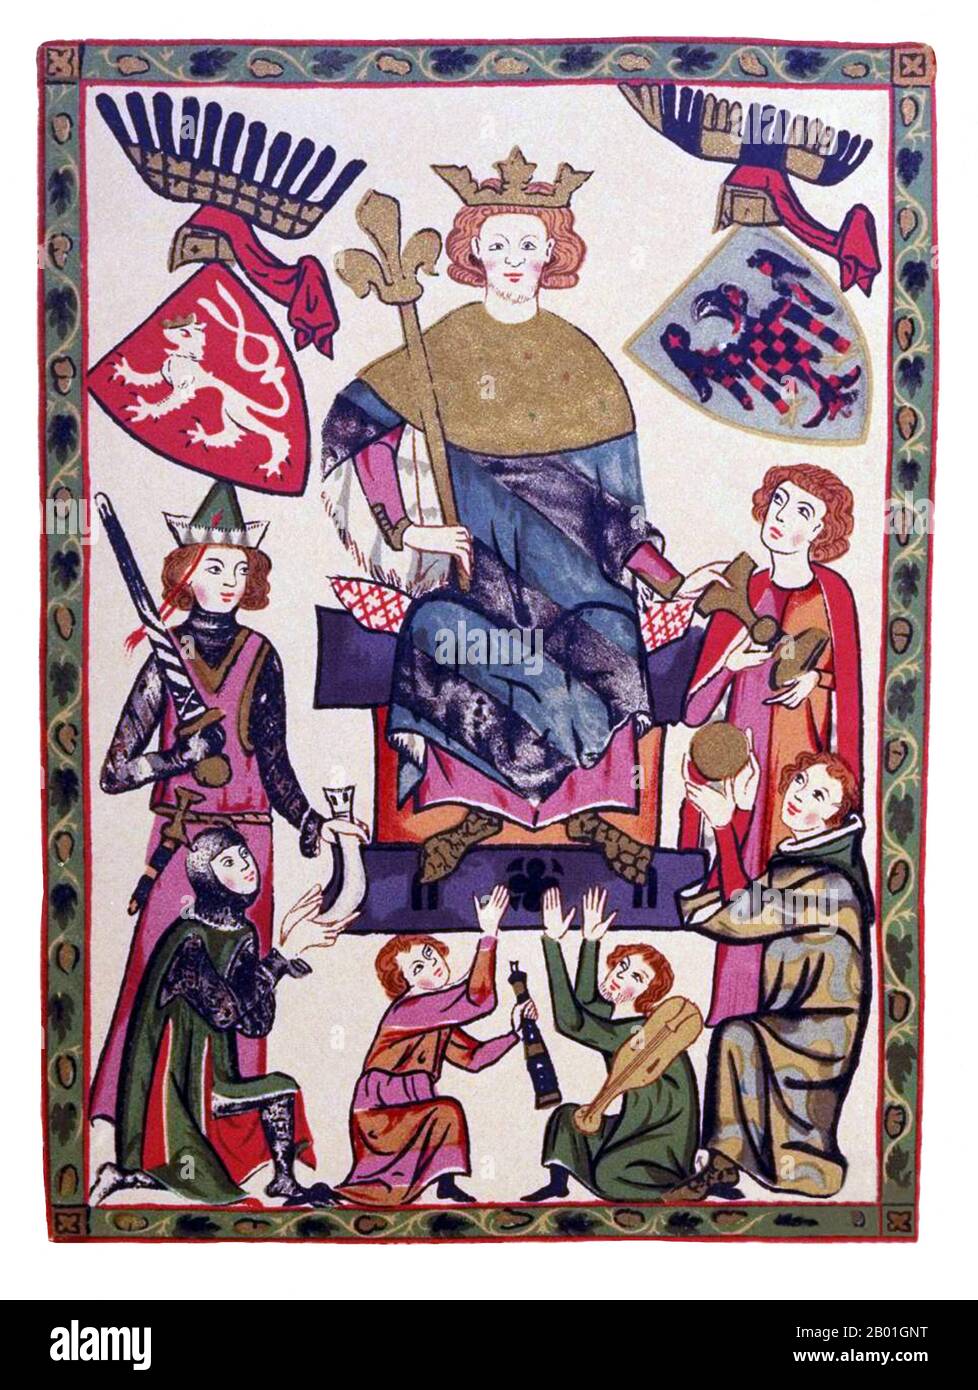 Czech Republic/Switzerland: 'Good King Wenceslas'. Miniature painting from the Codex Manesse, c. 1304-1340.  Wenceslaus II/Vaclav II of Bohemia (27 September 1271 - 21 June 1305), was the King of Bohemia (1278-1305) and Poland (1300-1305), and Duke of Cracow (1291-1305). The only son of King Ottokar II and a member of the Přemyslid dynasty, he was married to Judith of Habsburg, daughter of Rudolf I, King of the Romans. He claimed the crown of Hungary through his son, Wenceslaus III, but he died before he could fully secure it. He was considered one of the most important Czech kings. Stock Photo